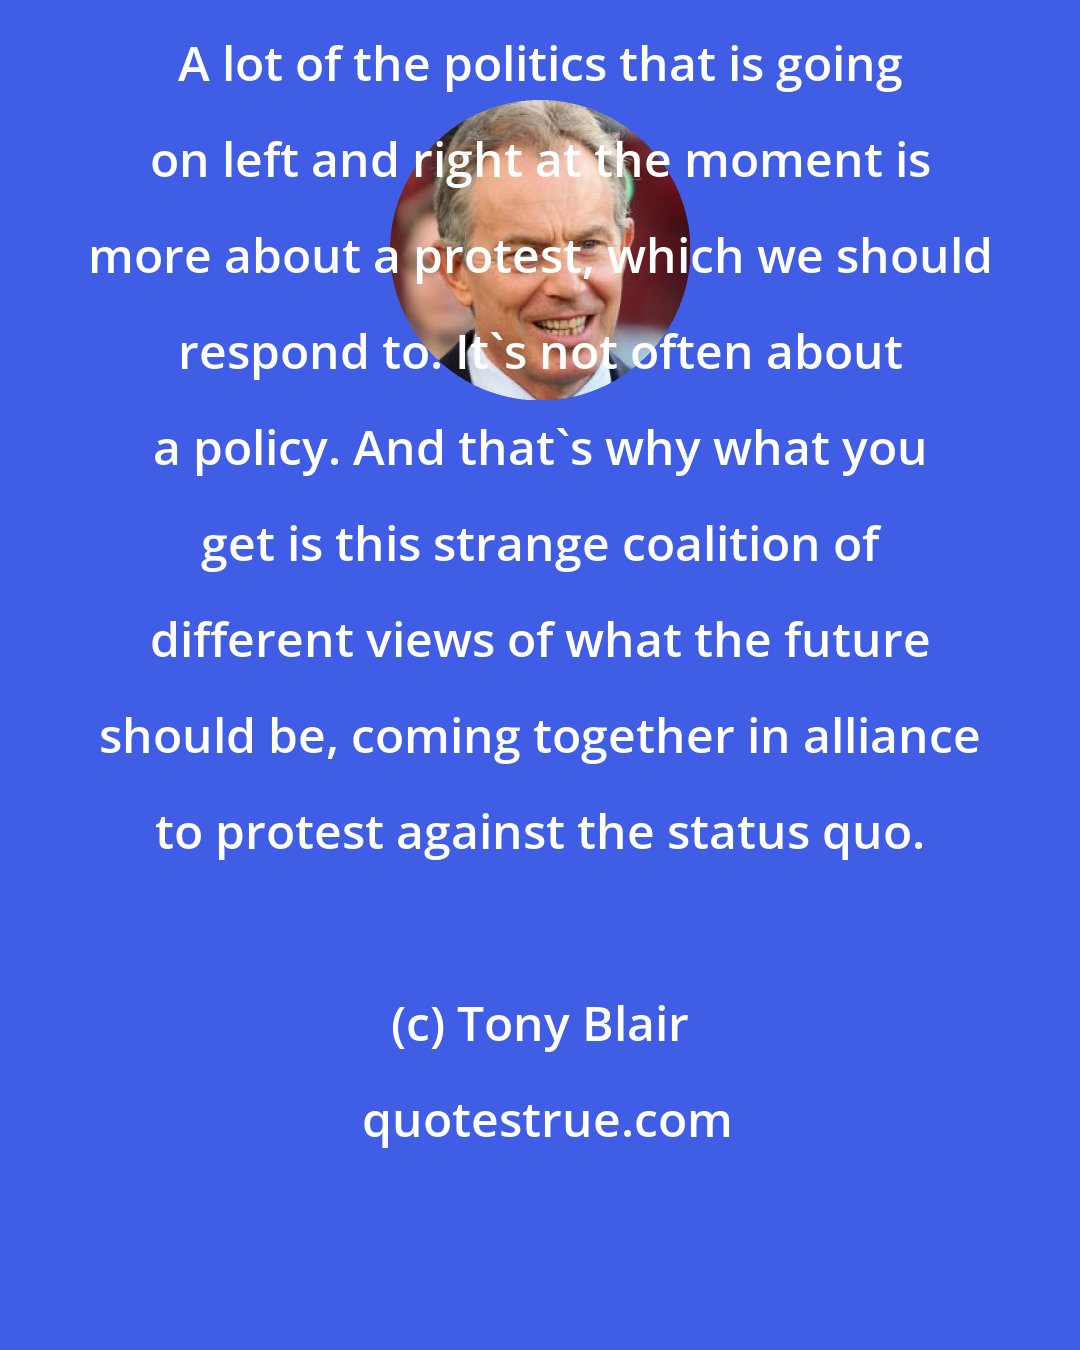 Tony Blair: A lot of the politics that is going on left and right at the moment is more about a protest, which we should respond to. It's not often about a policy. And that's why what you get is this strange coalition of different views of what the future should be, coming together in alliance to protest against the status quo.